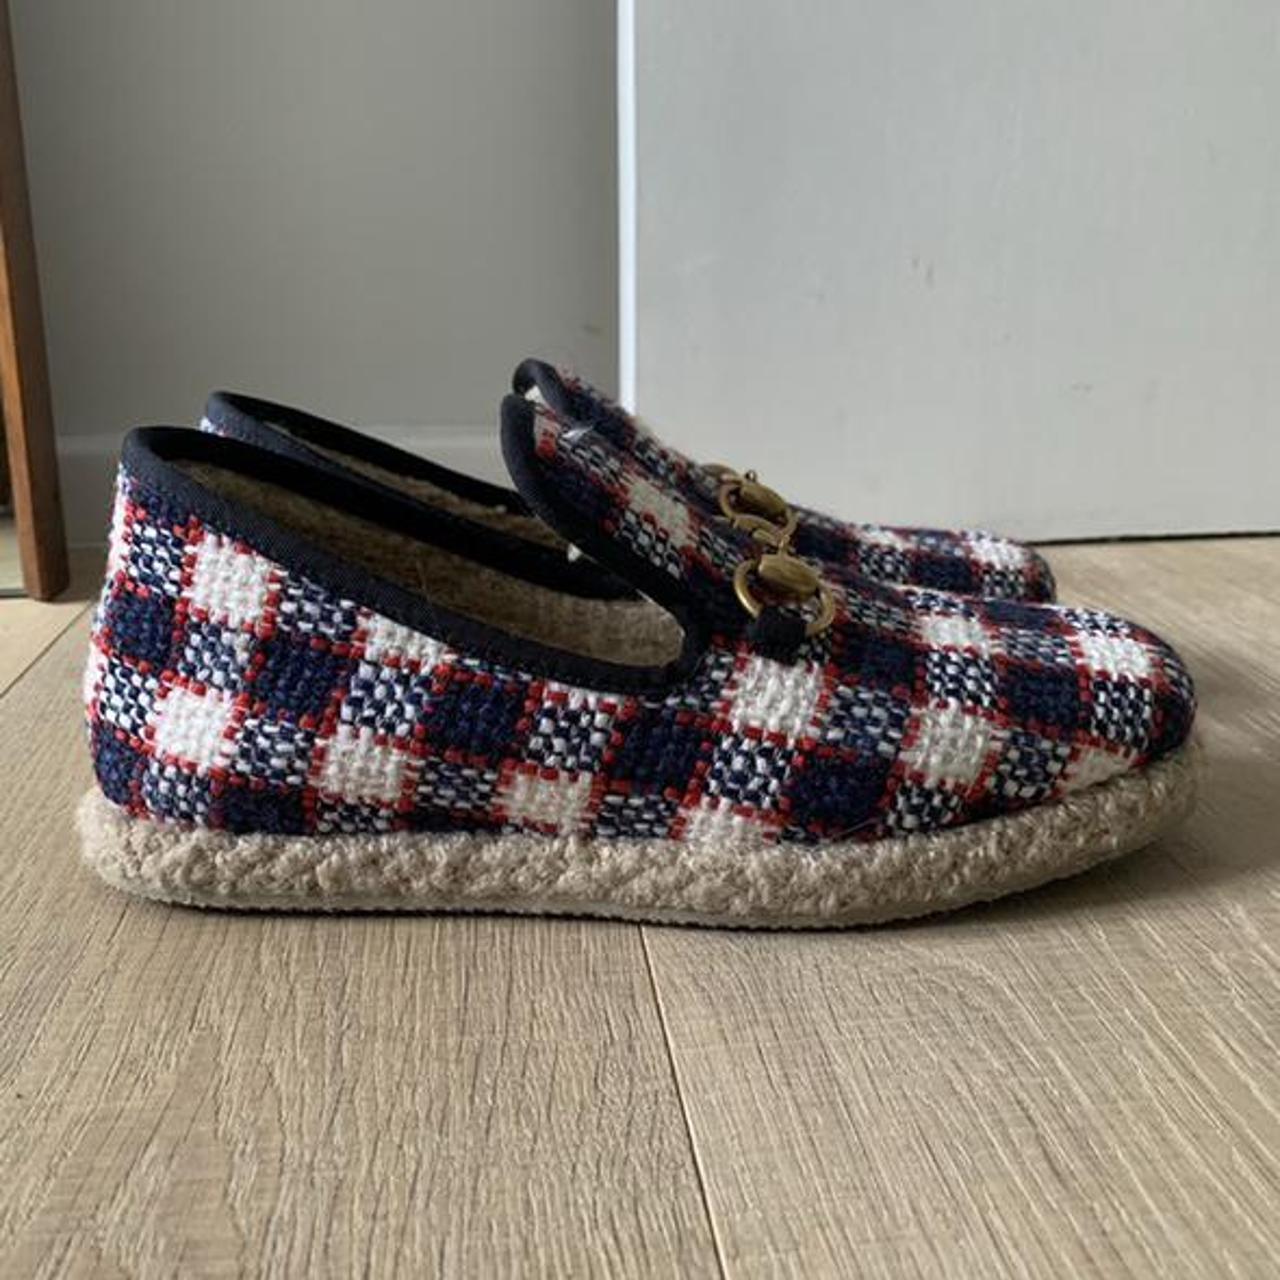 Product Image 3 - Gucci fleece tartan loafers. These